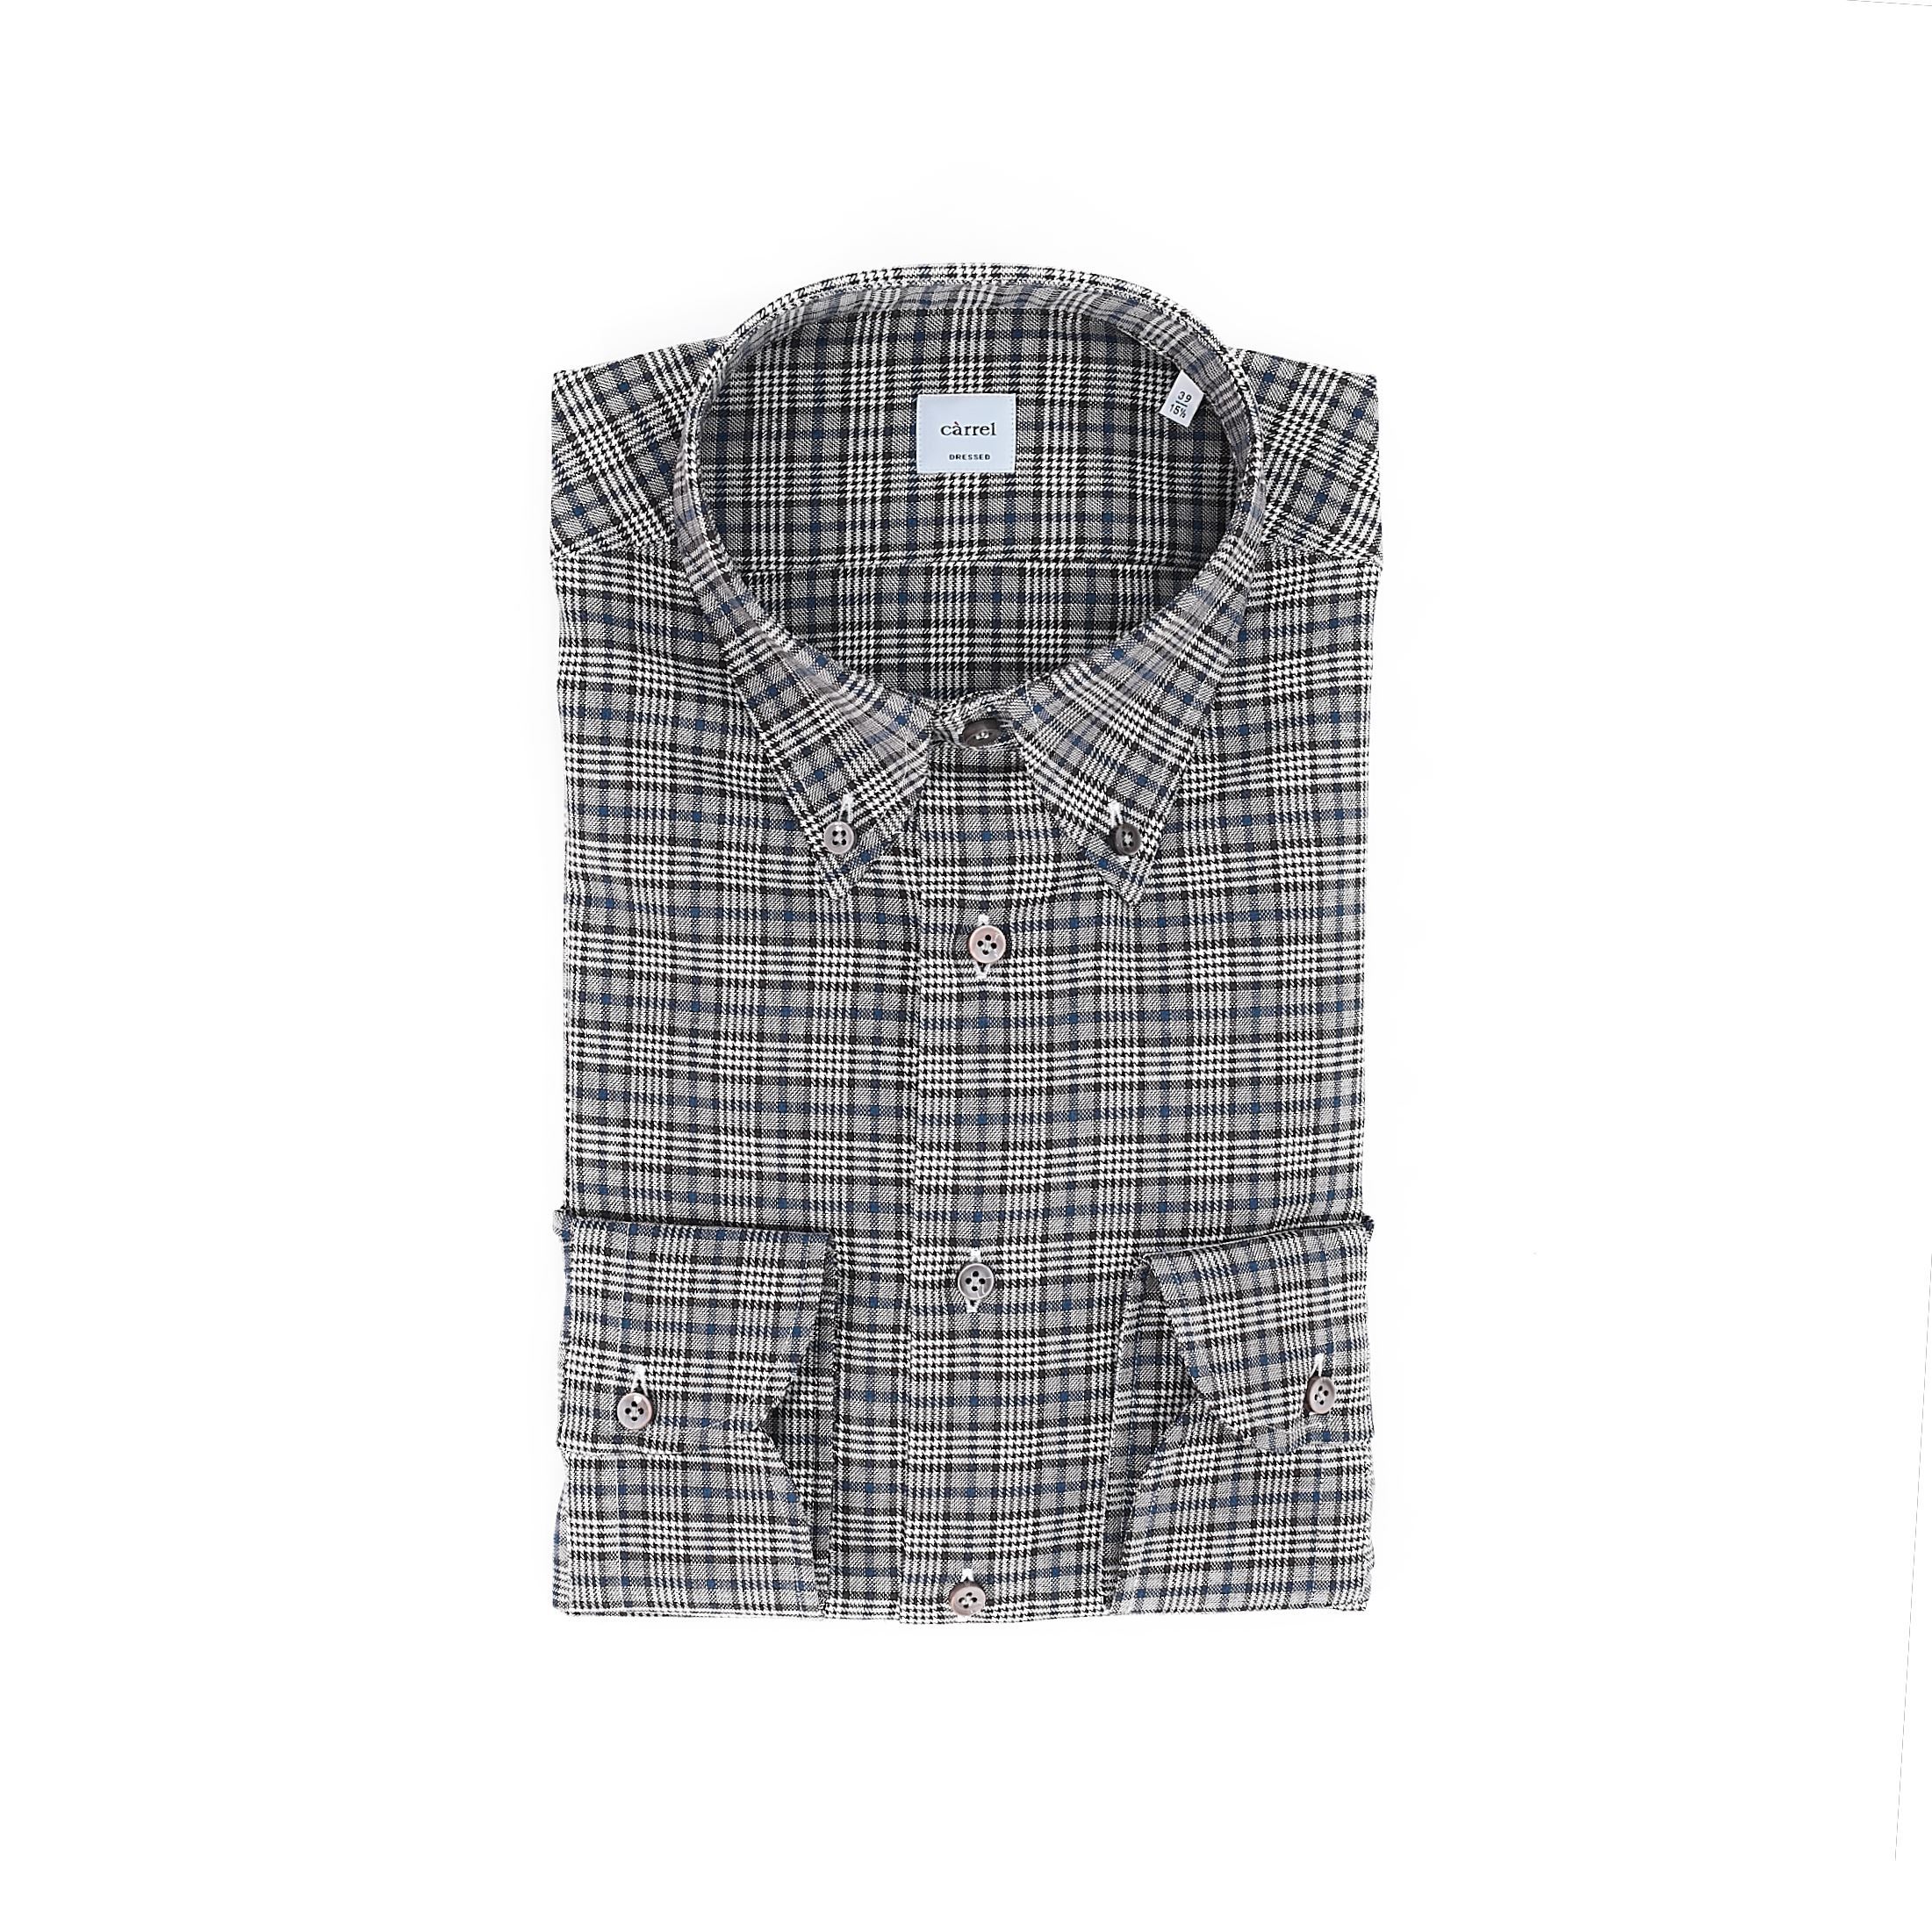 Picture of brown and blue checked shirt